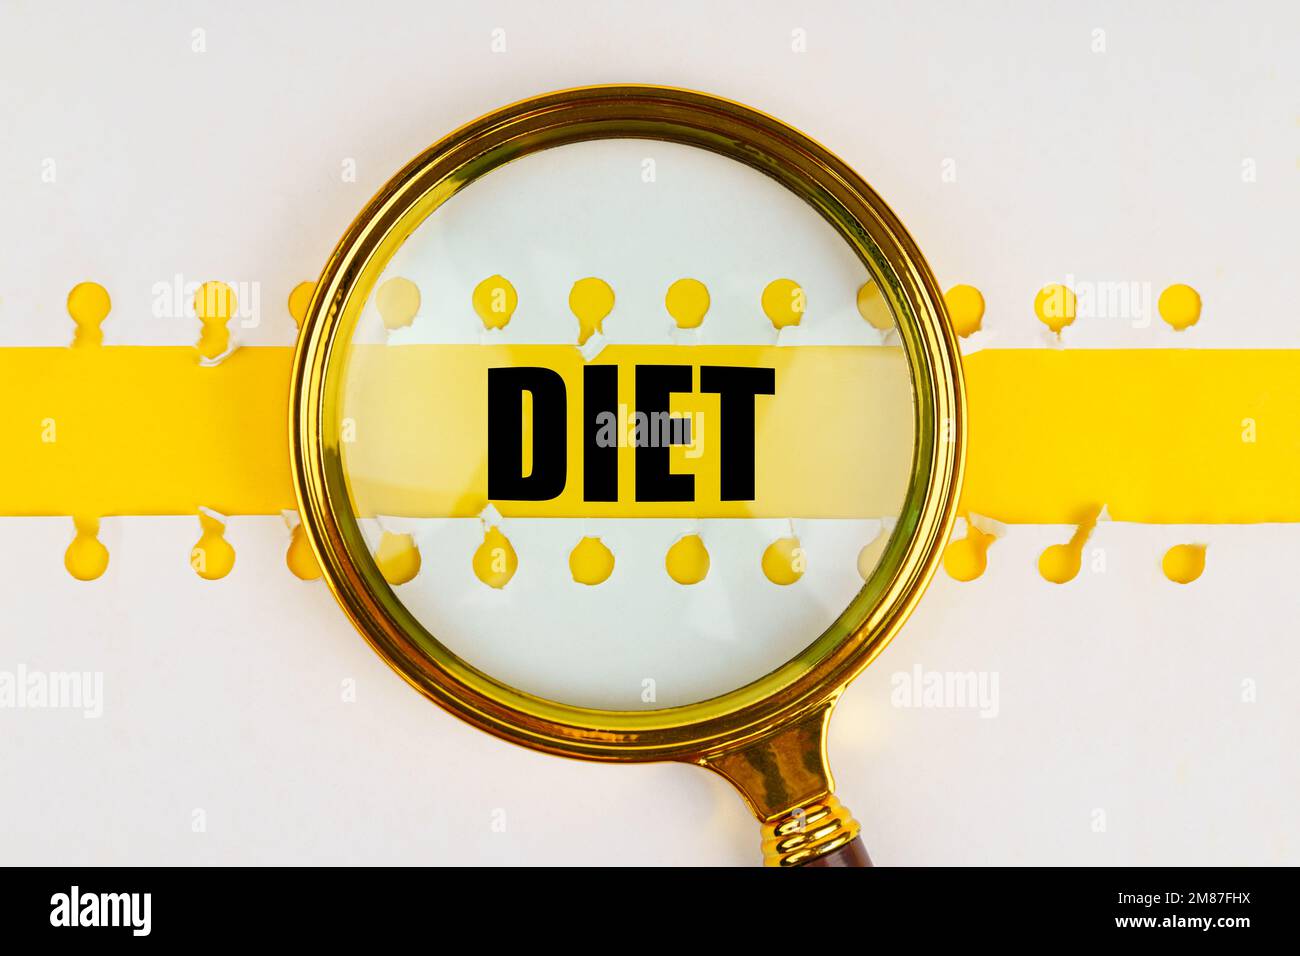 Between two sheets from a notebook on a yellow strip with the inscription - Diet, there is a magnifying glass. Stock Photo